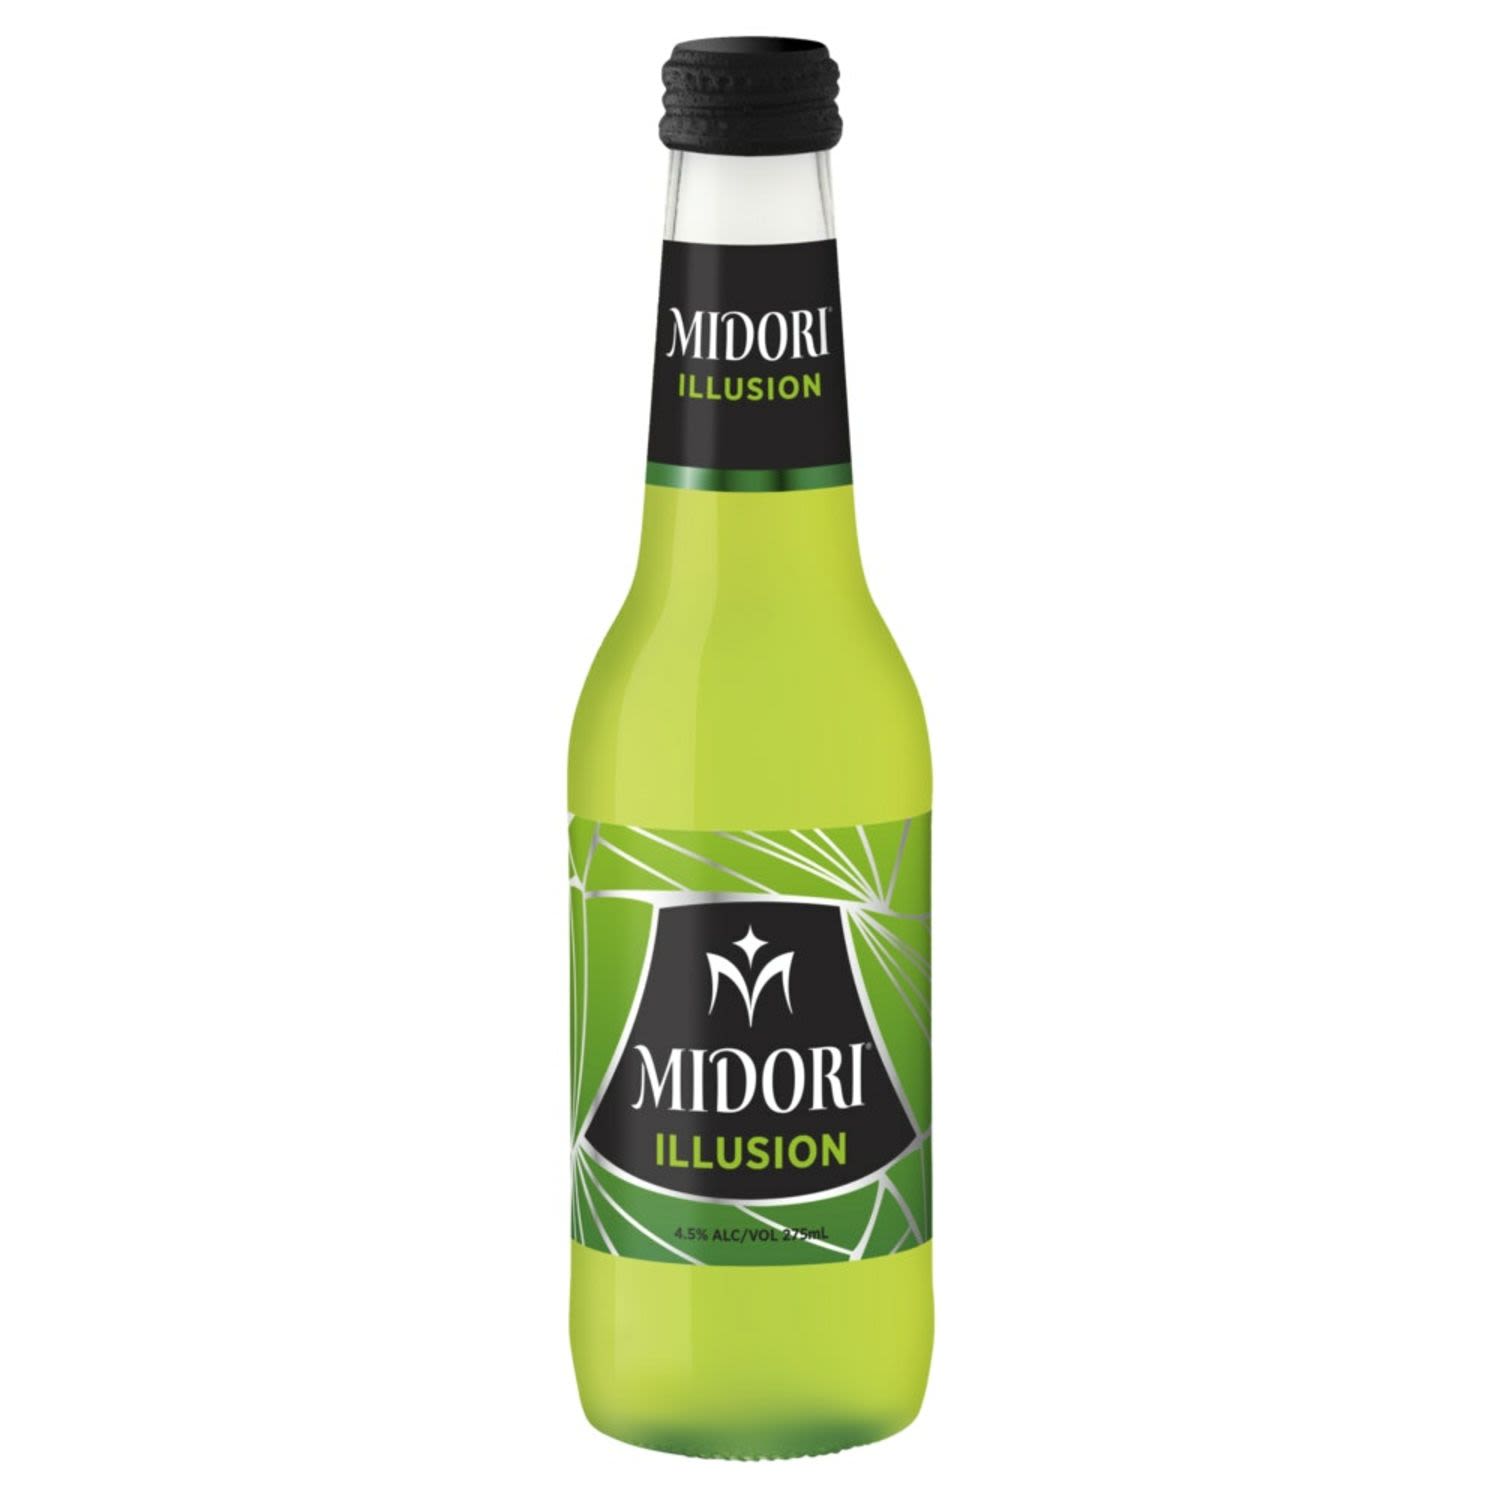 MIDORI Illusion is the quintessential Australian summer cocktail. A mouth-watering combination of MIDORI and refreshing pineapple, with a hint of vodka gives you the fresh taste of summer all year round.<br /> <br />Alcohol Volume: 4.50%<br /><br />Pack Format: Bottle<br /><br />Standard Drinks: 0.9</br /><br />Pack Type: Bottle<br />